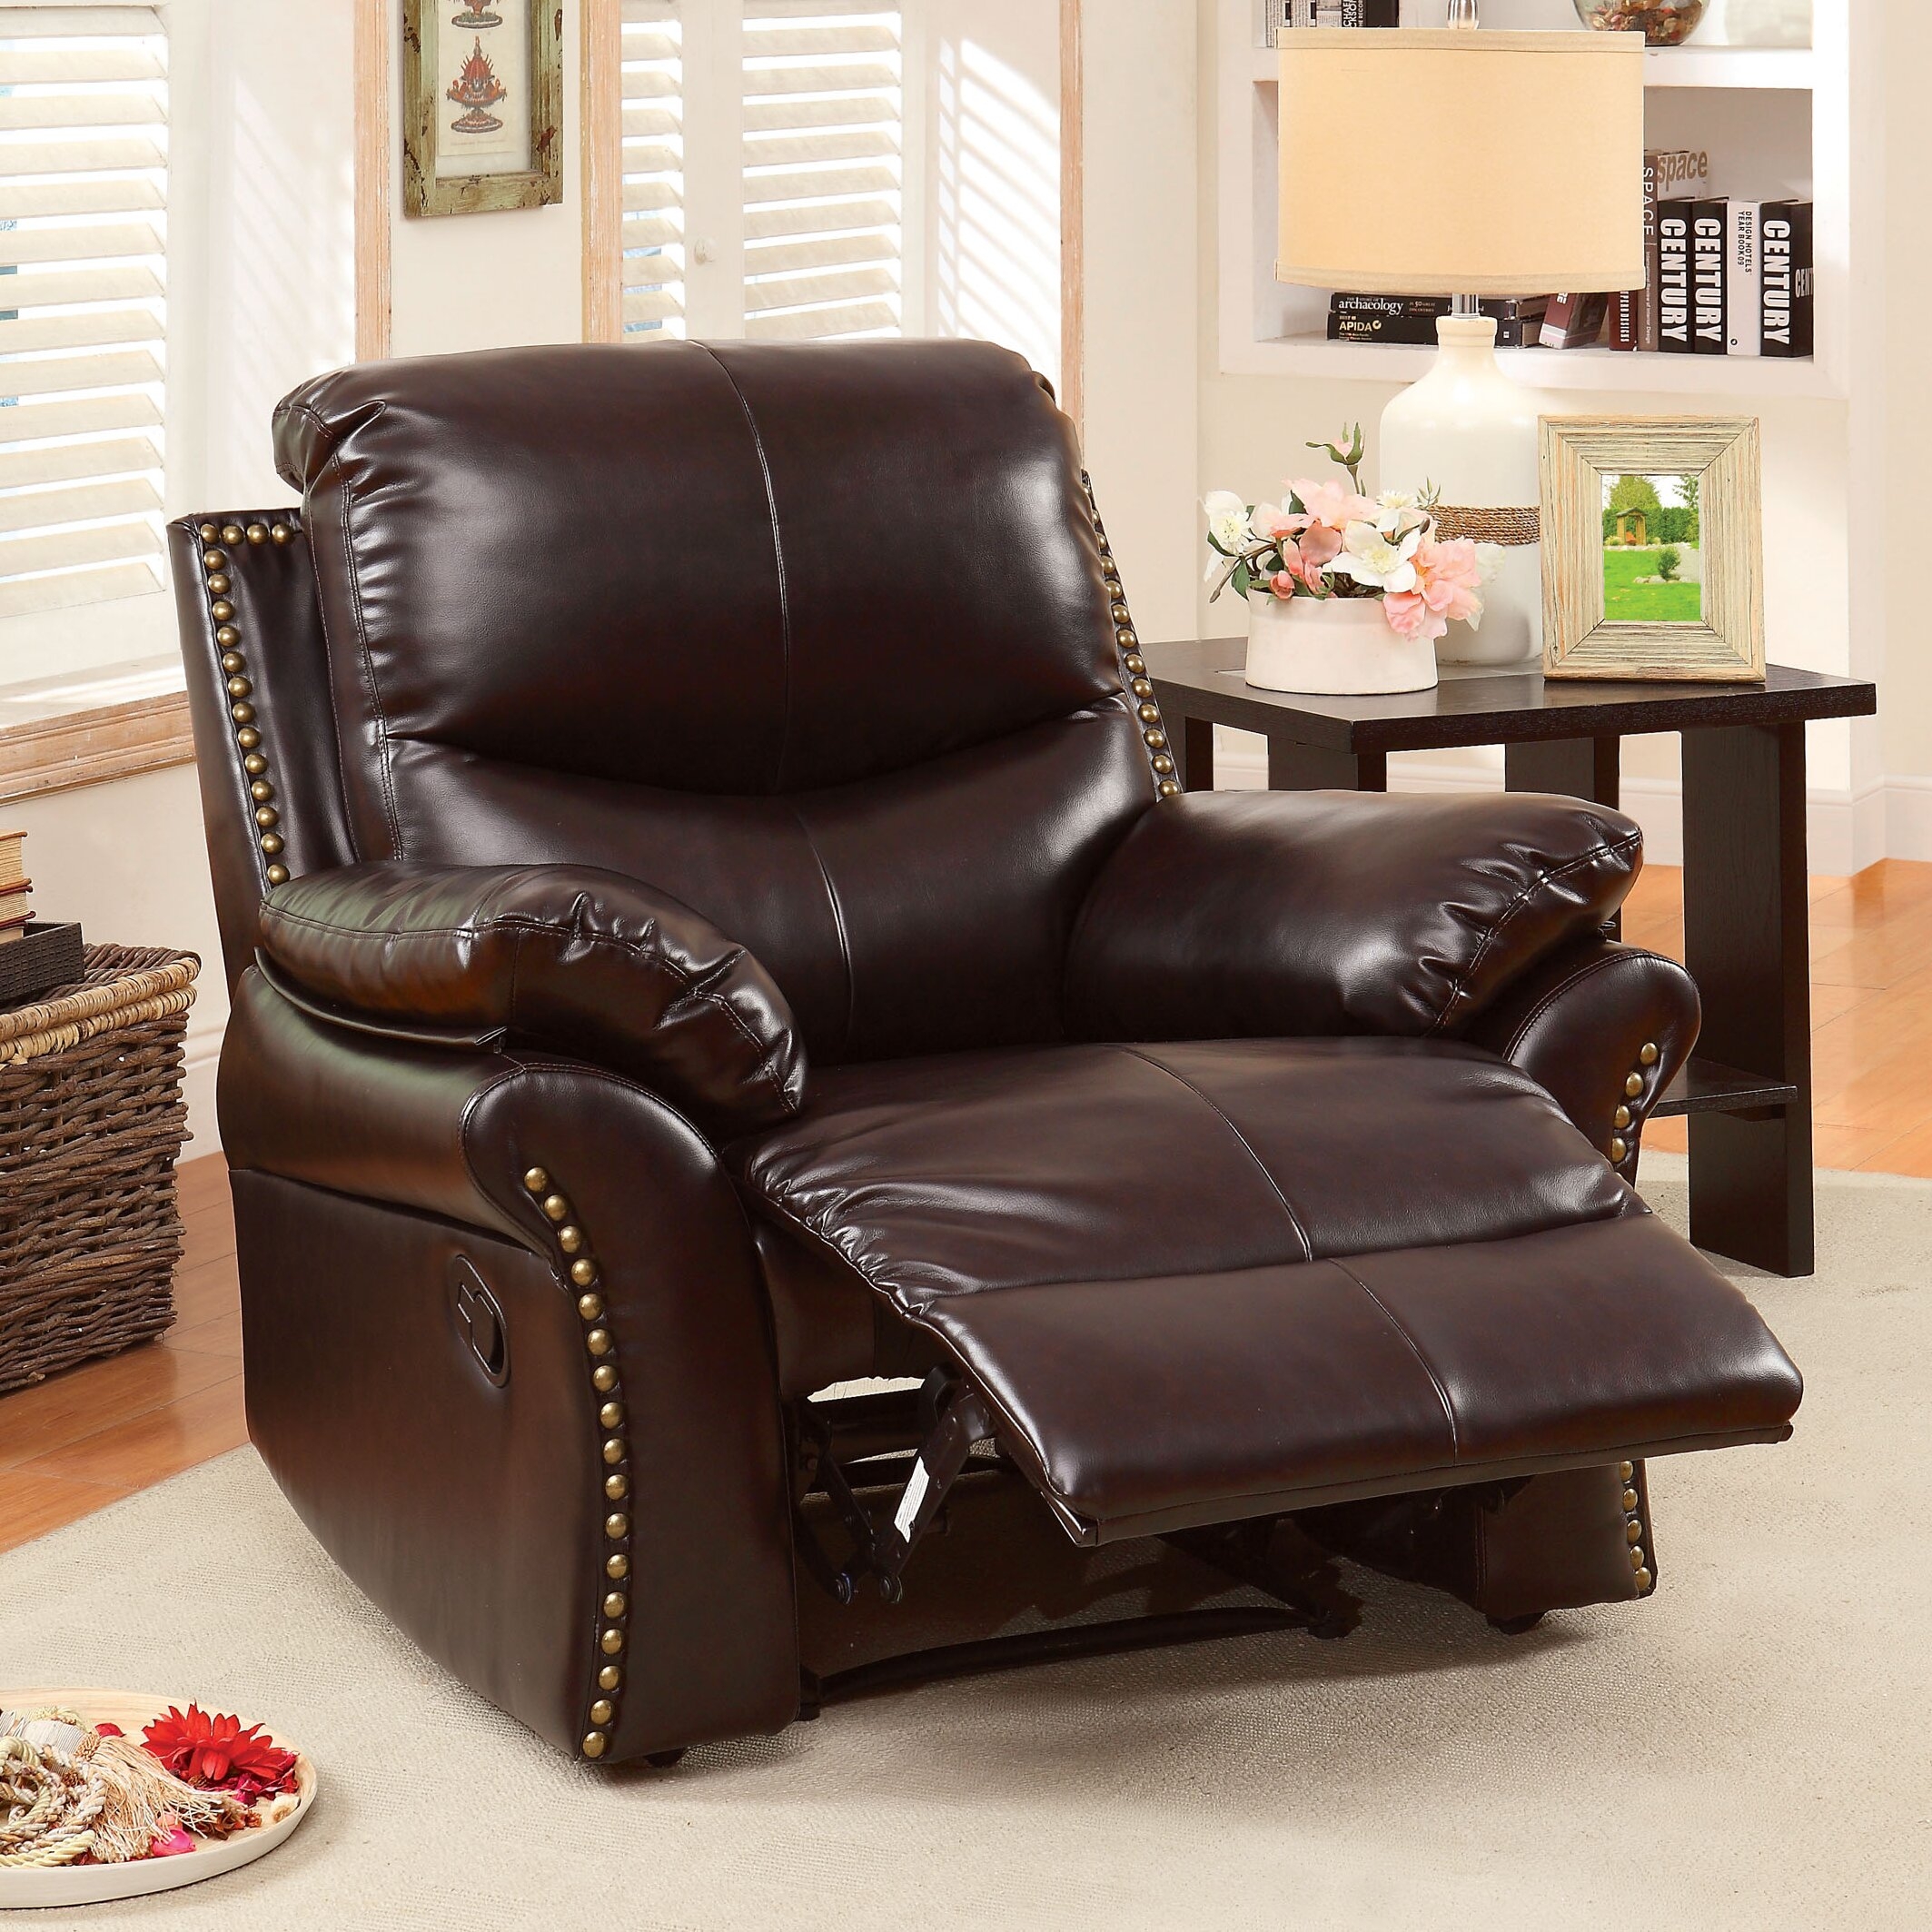 Furniture Of America Dudley Bonded Leather Match Recliner With Nailhead Trim